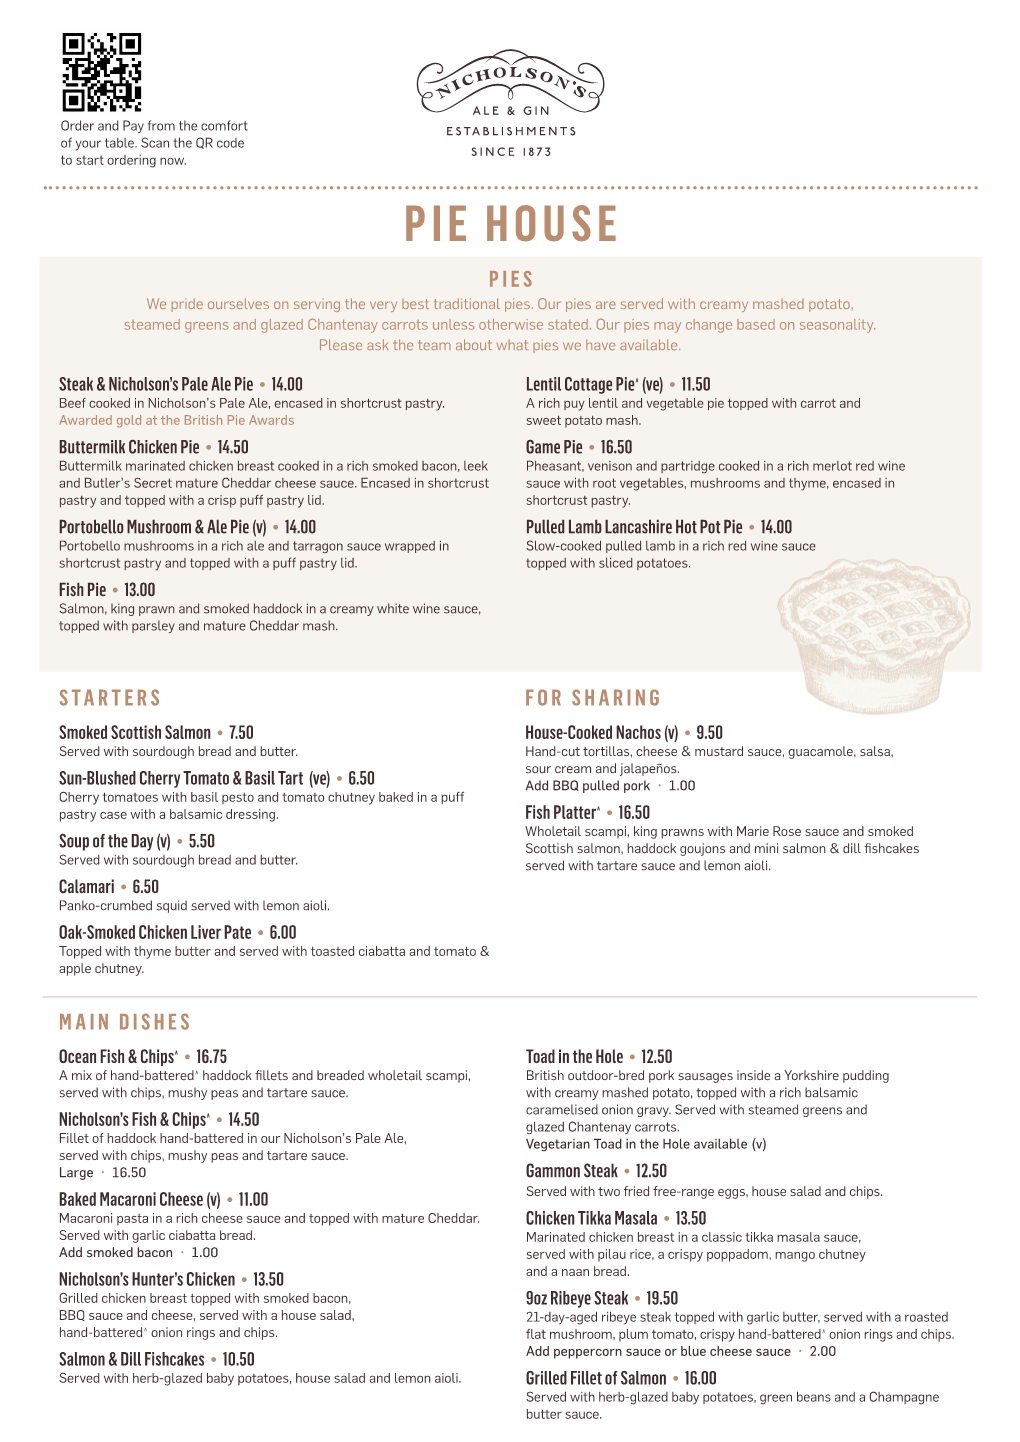 PIE HOUSE PIES We Pride Ourselves on Serving the Very Best Traditional Pies